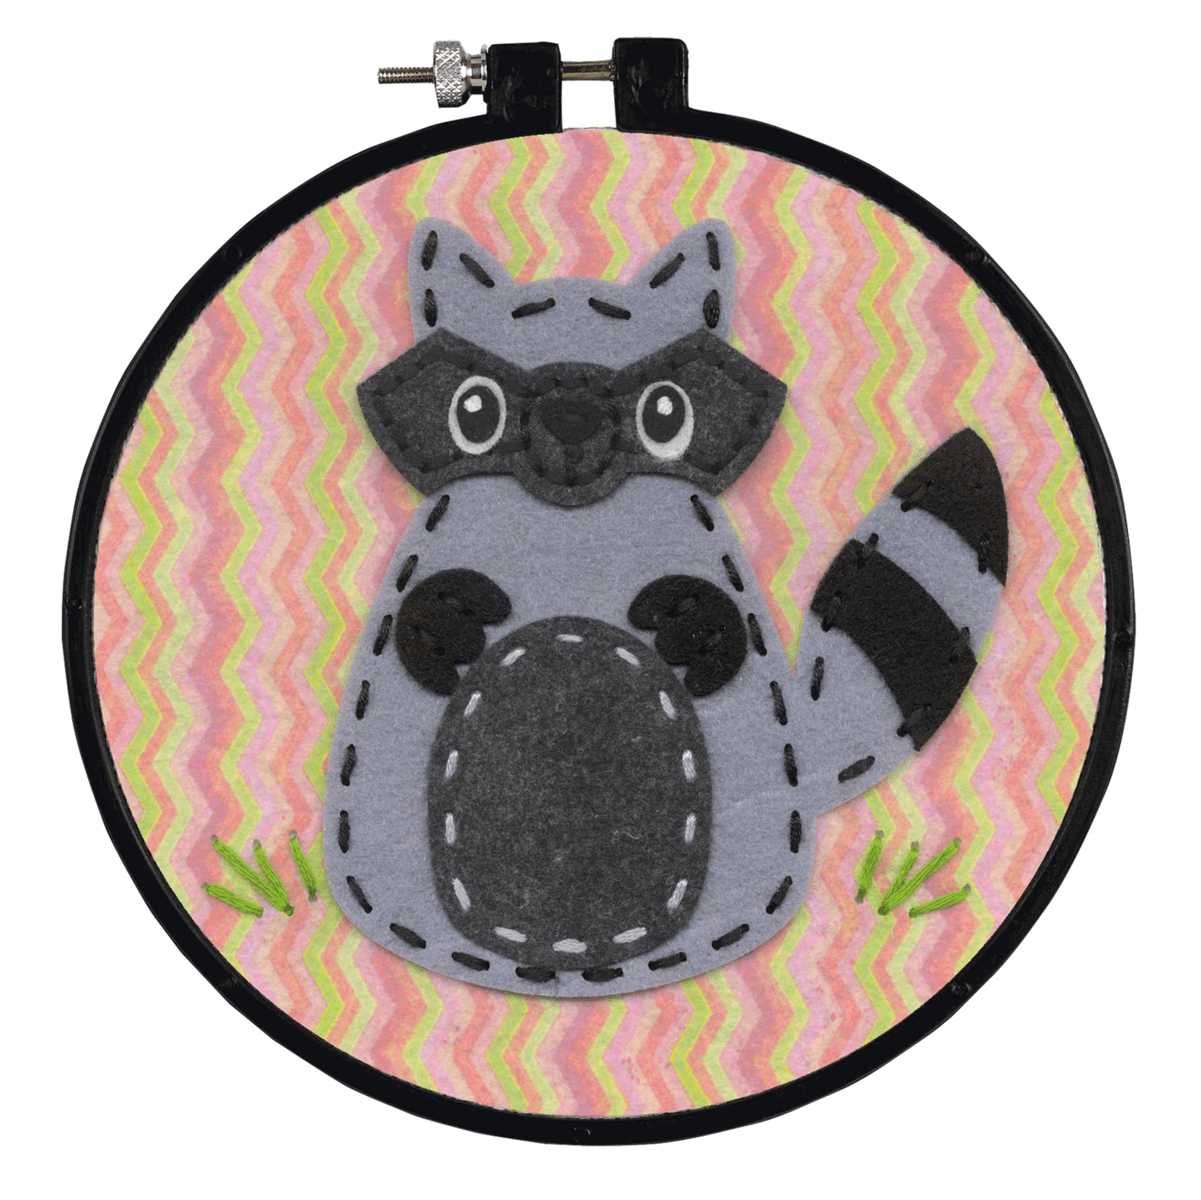 Learn-a-Craft: Counted Cross Stitch Kit: Little Raccoon